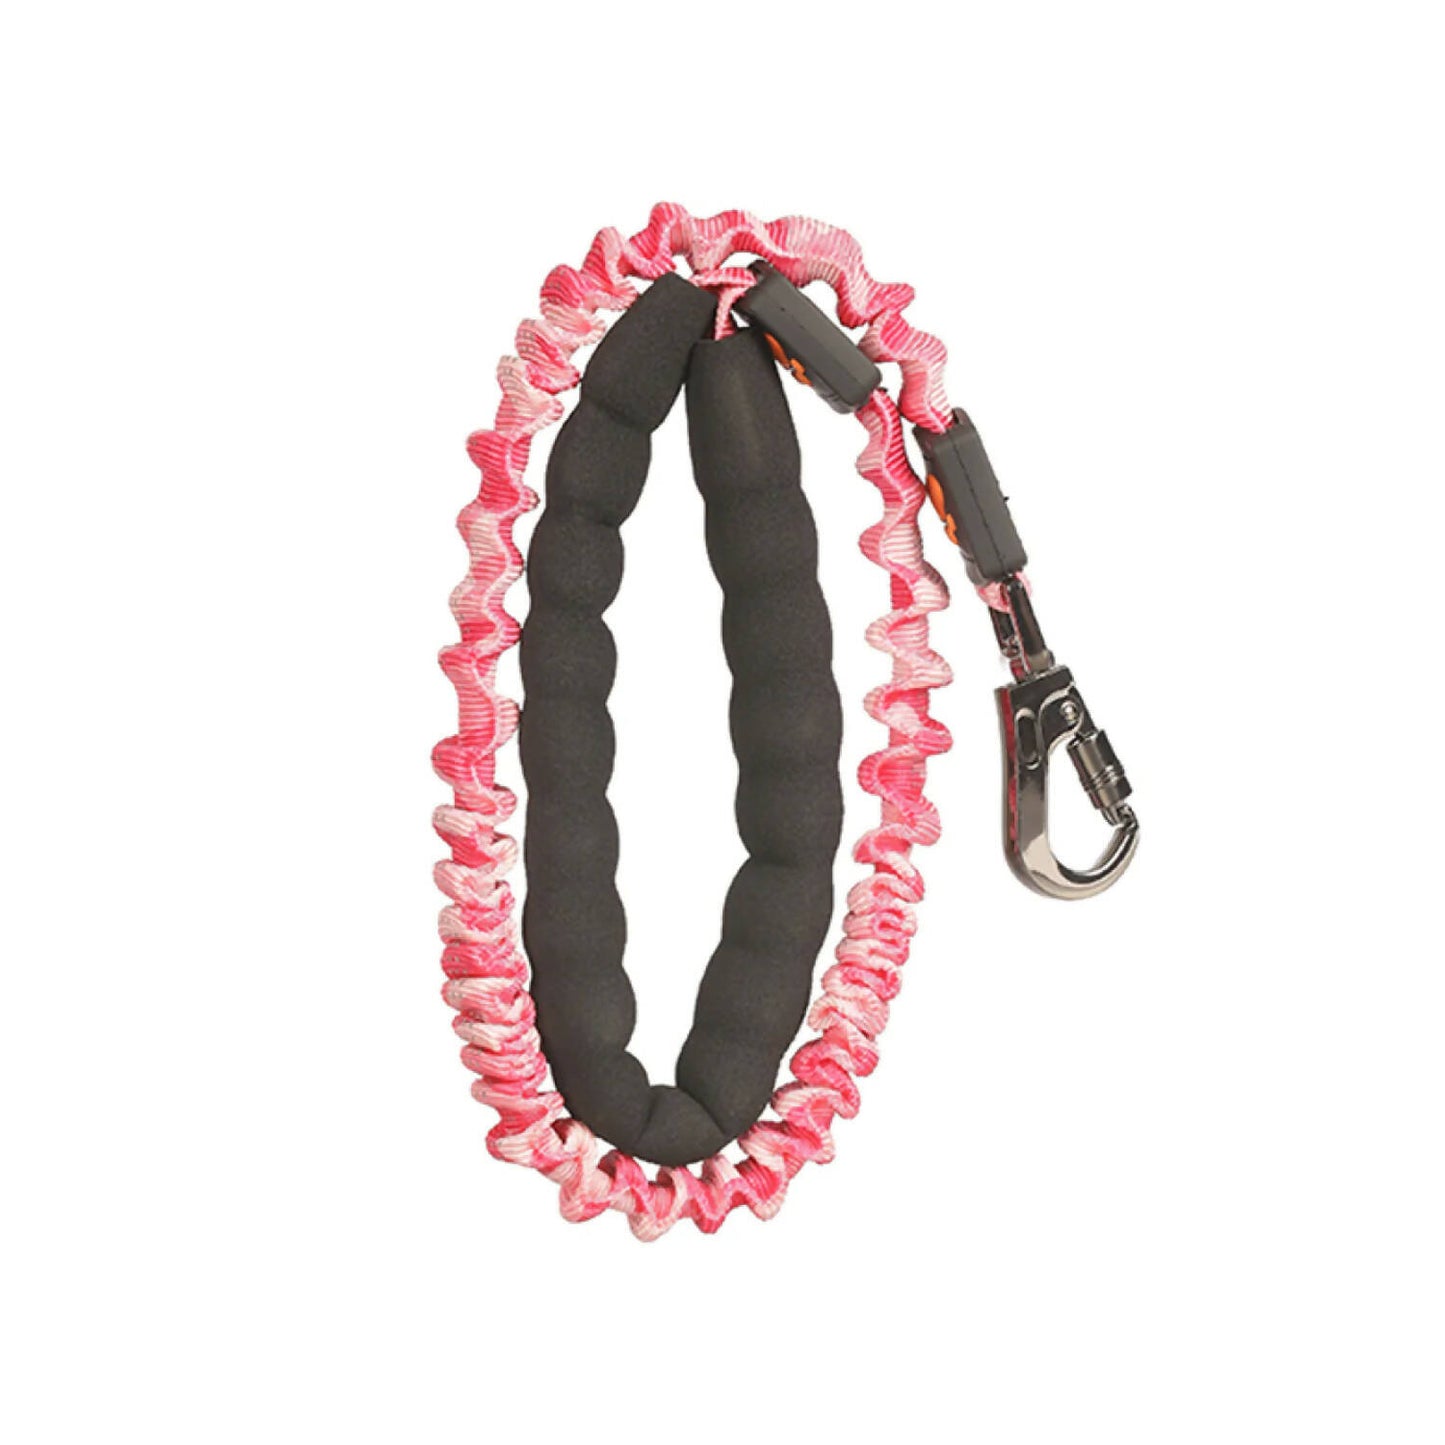 Basil - Shock Absorbing Stretch Leash For Dogs